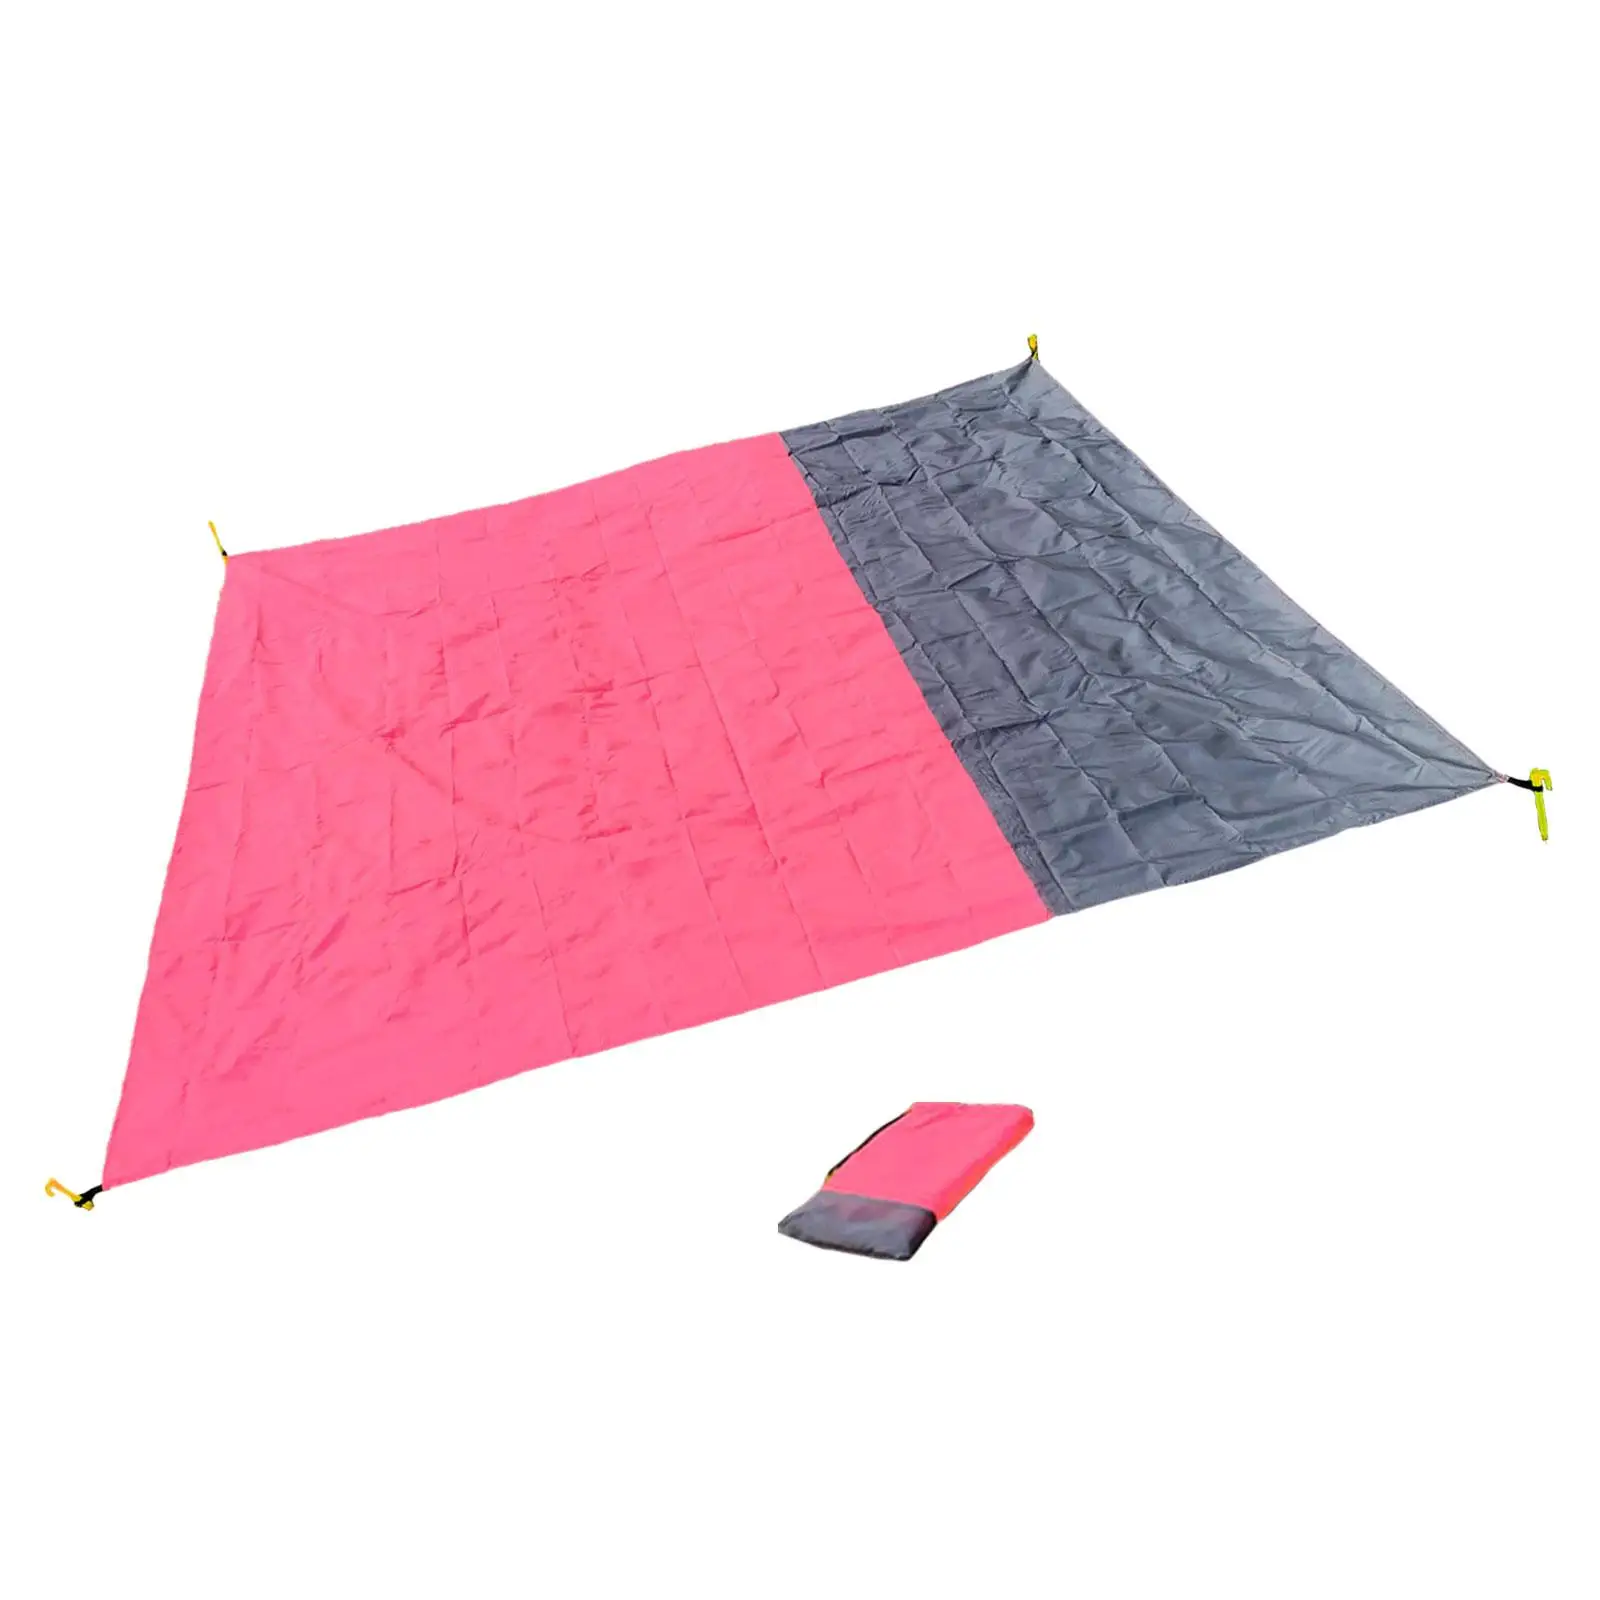 Picnic Blanket Foldable Compact Camping Blanket for Park Sports